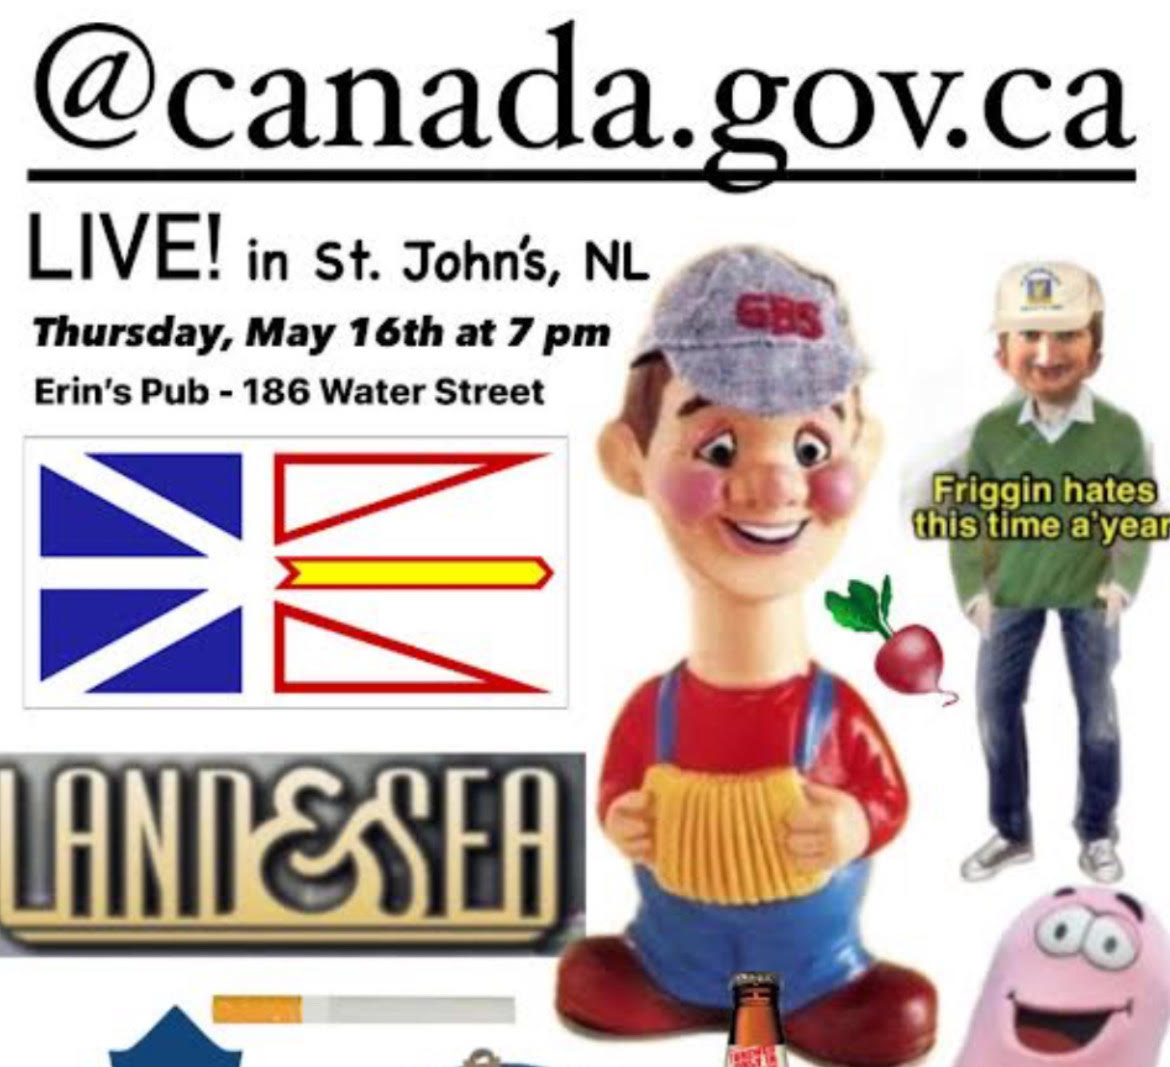 @canada.gov.ca - an evening with the admin in St. John's at Erin's